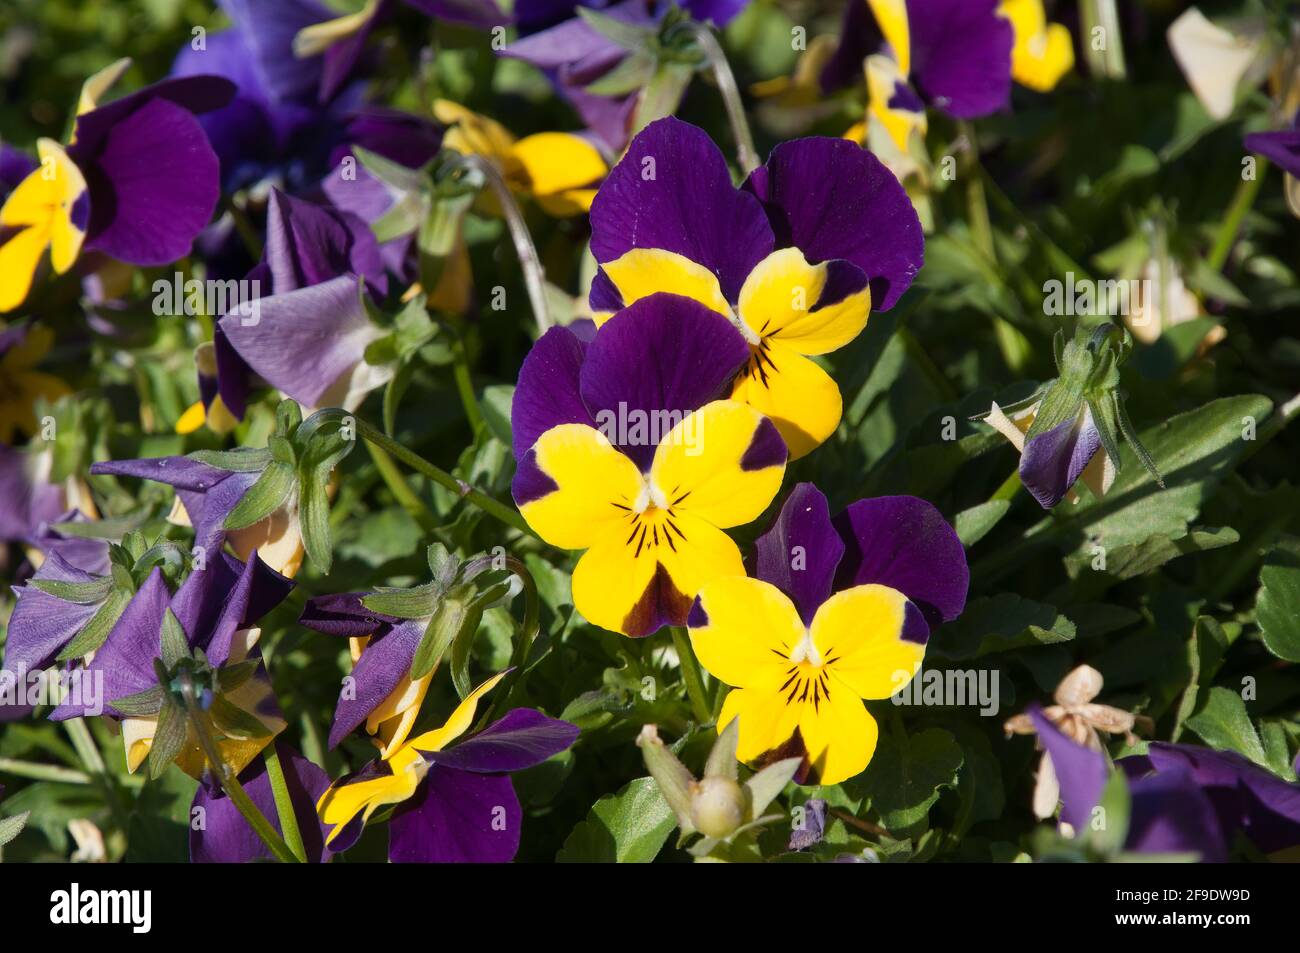 Sydney Australia, flowers if a tricolor pansy in winter garden Stock Photo